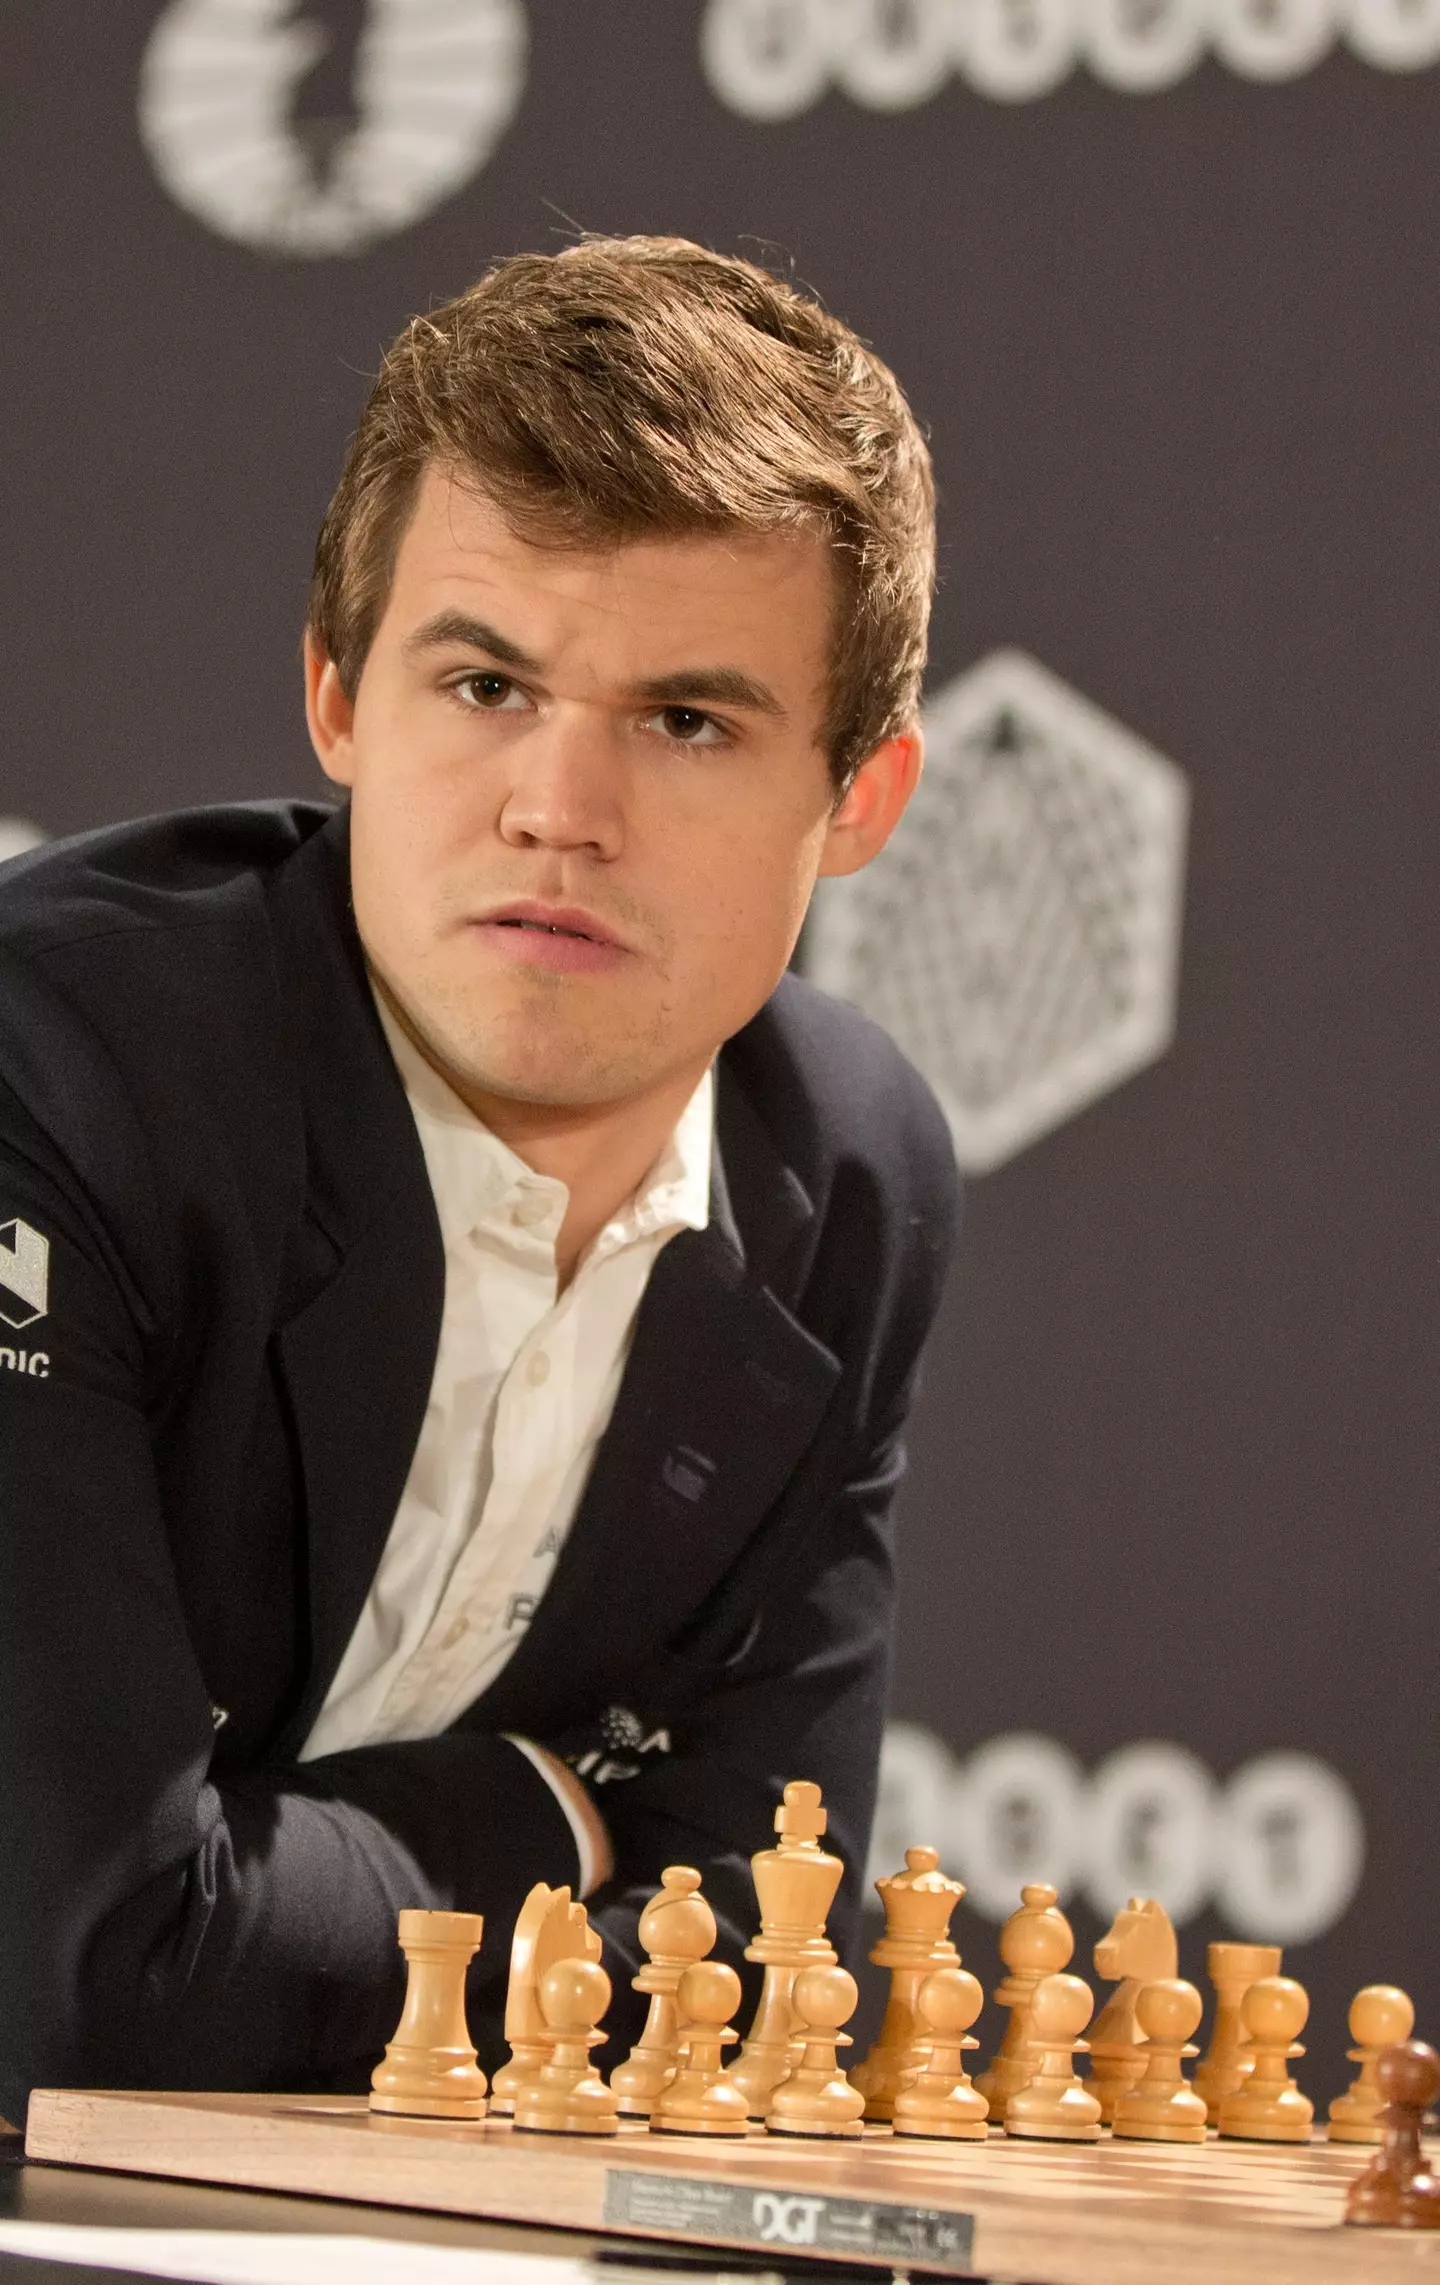 Magnus Carlsen has openly accused fellow player Hans Niemann of cheating in a bombshell statement.